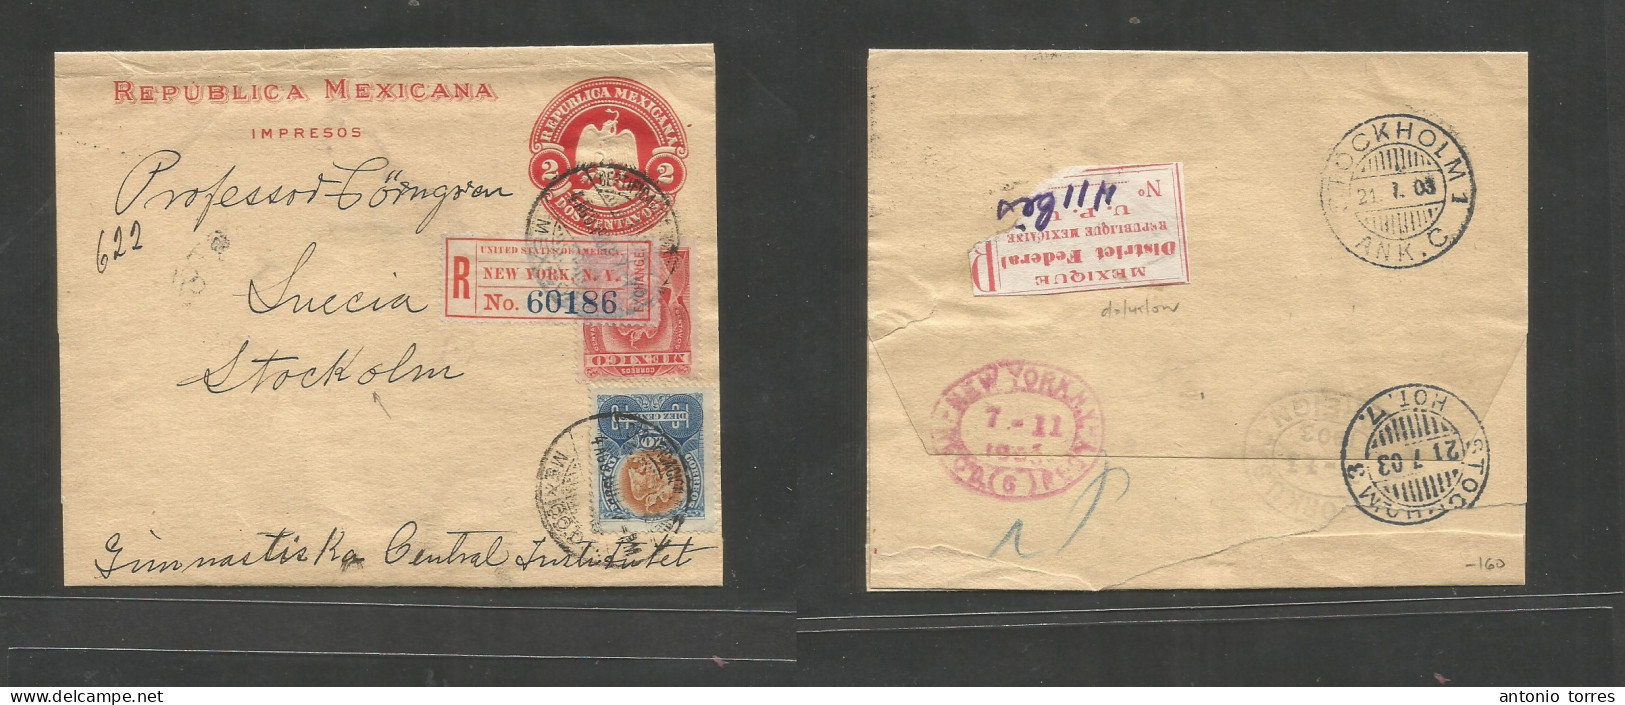 Mexico - Stationery. 1903 (4 Aug) DF - Sweden, Stockholm (21 July 03) Via NYC. Registered 2c Red Complete Stat Wrapper + - Mexiko